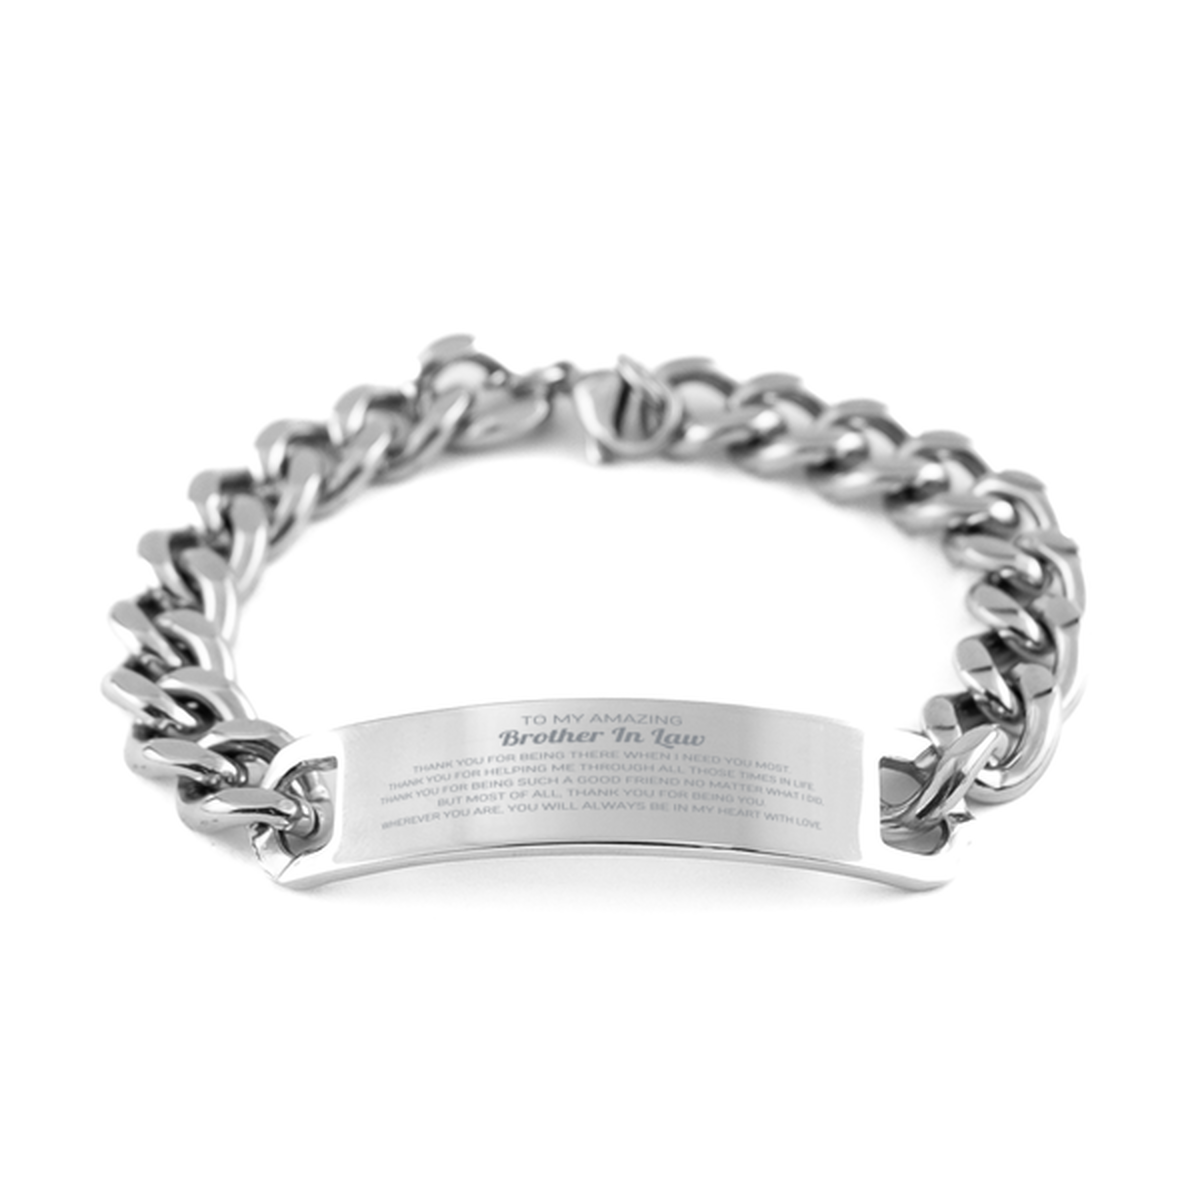 To My Amazing Brother In Law Cuban Chain Stainless Steel Bracelet, Thank you for being there, Thank You Gifts For Brother In Law, Birthday, Christmas Unique Gifts For Brother In Law